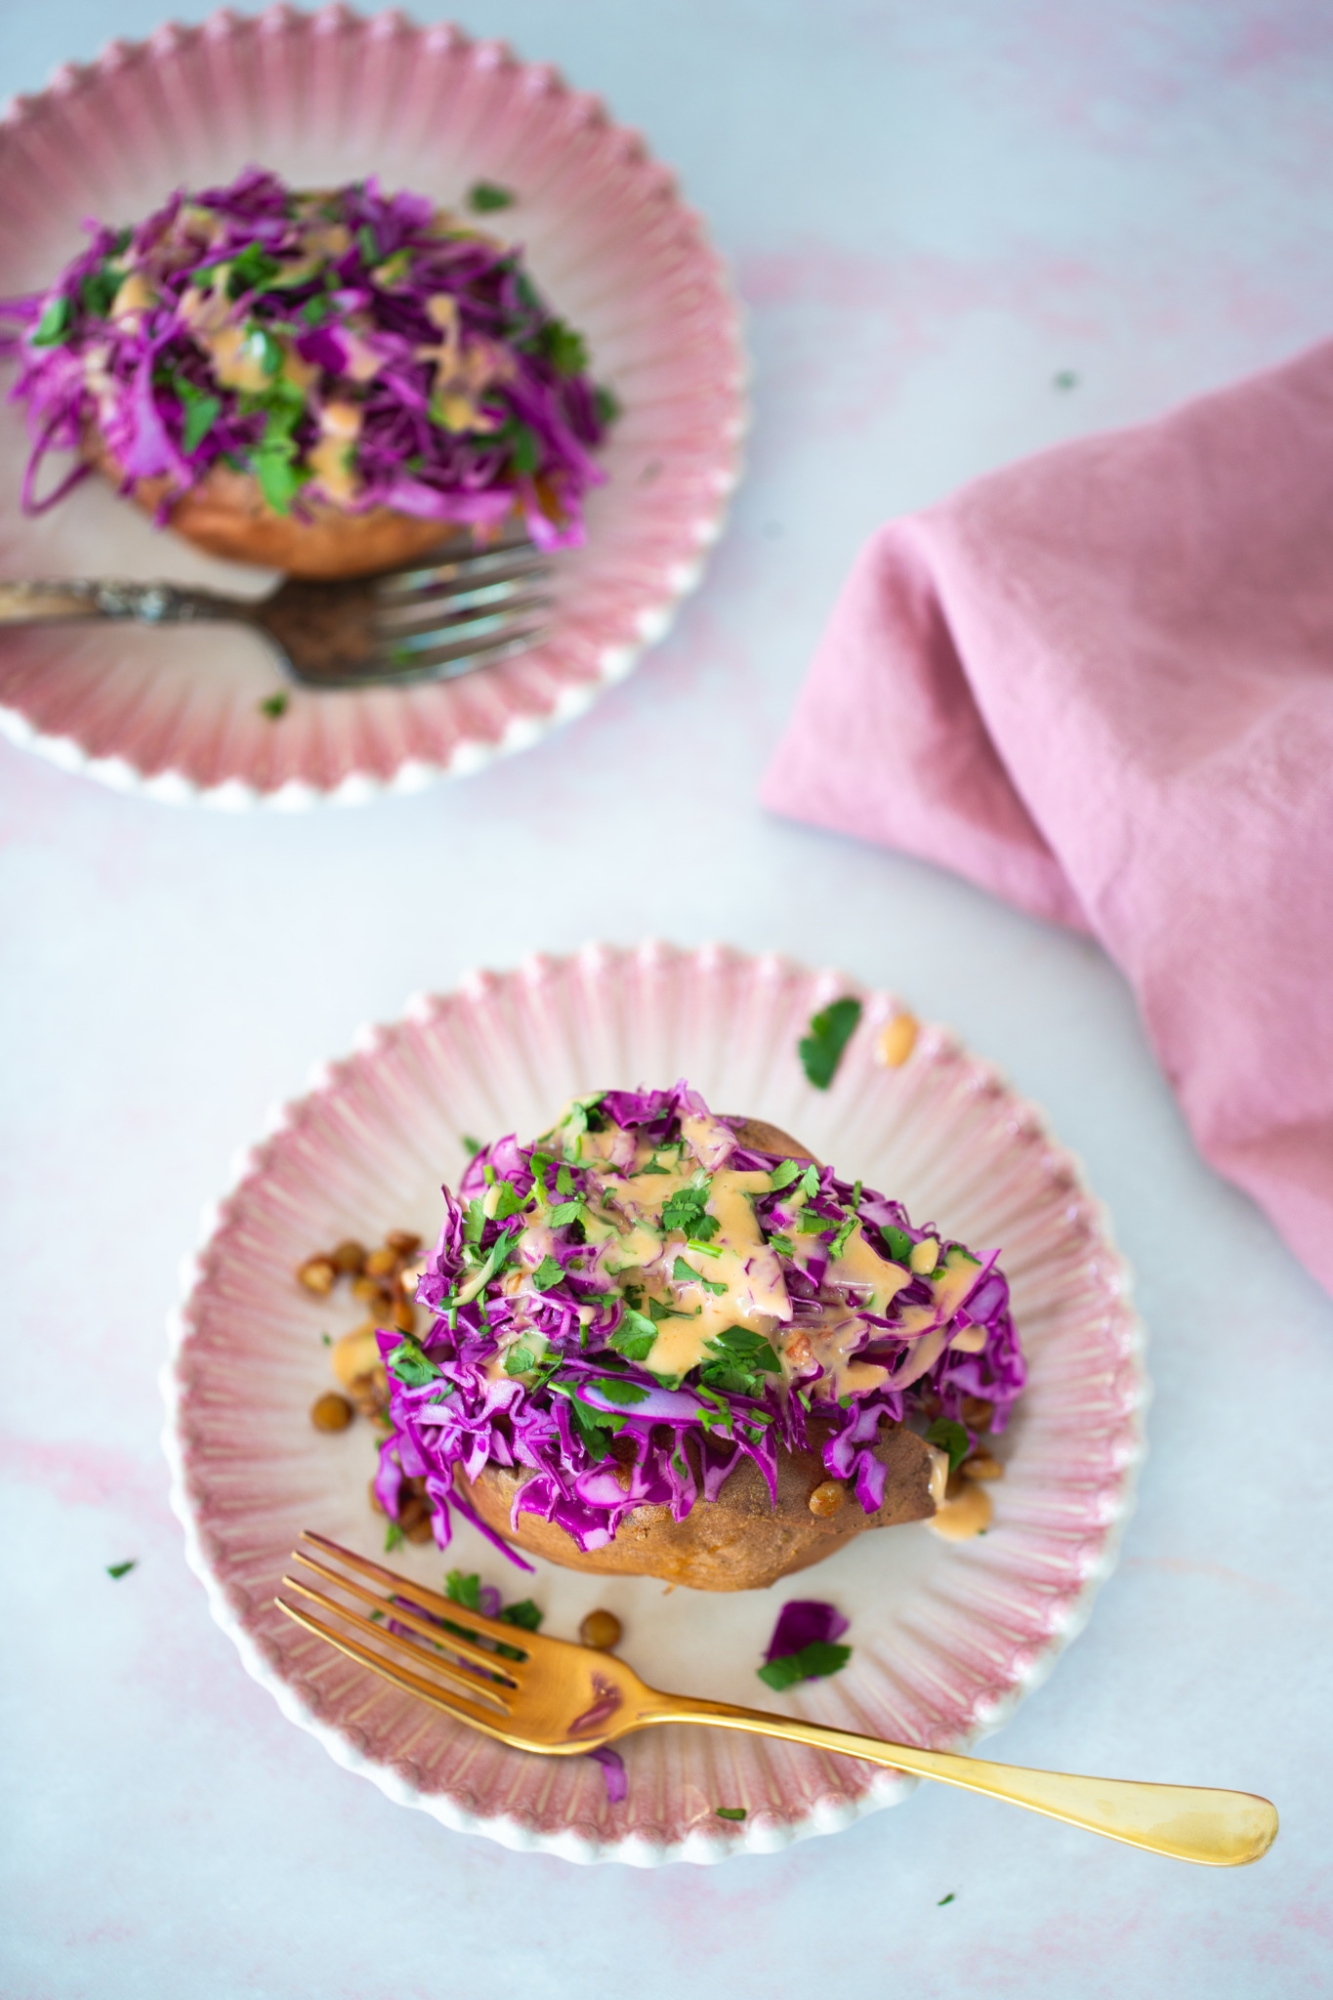 LOADED SWEET POTATOES WITH BBQ LENTILS AND SPICY SLAW